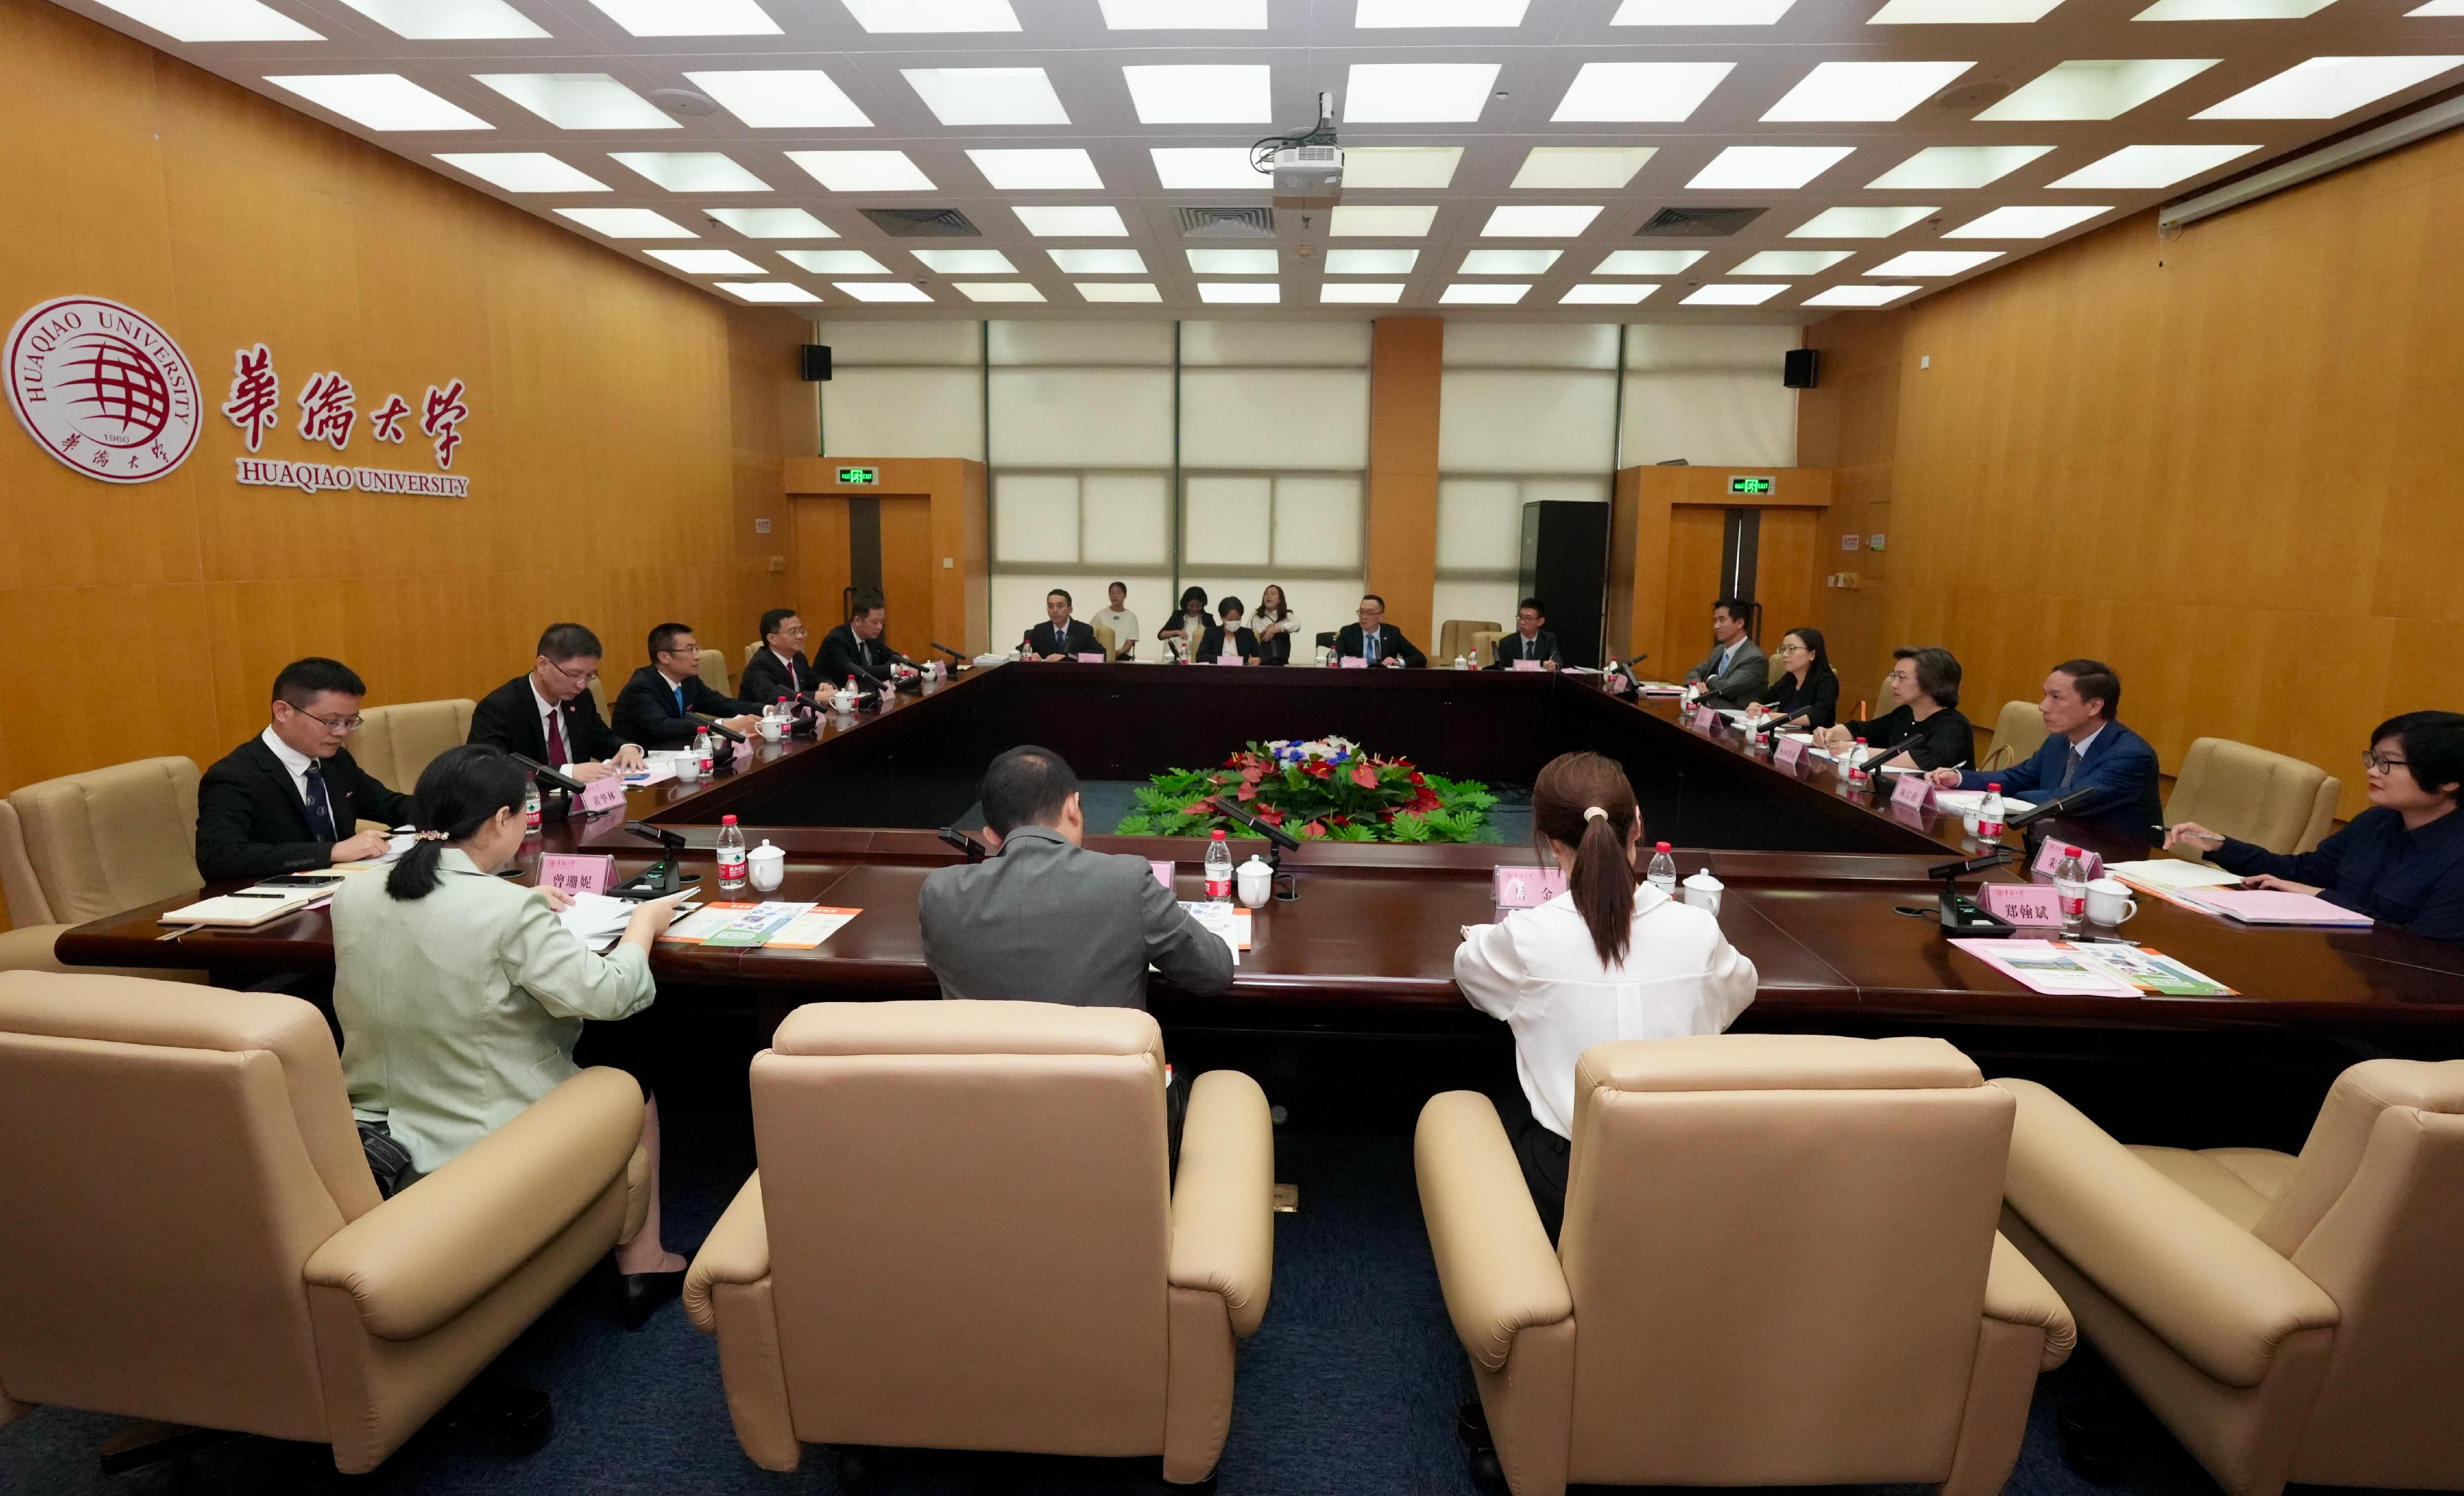 The Secretary for the Civil Service, Mrs Ingrid Yeung (third right), today (September 7) met and exchanged views with the President of Huaqiao University, Mr Wu Jianping (third left), and university staff in charge of student affairs at the Xiamen campus of the university in Fujian Province.